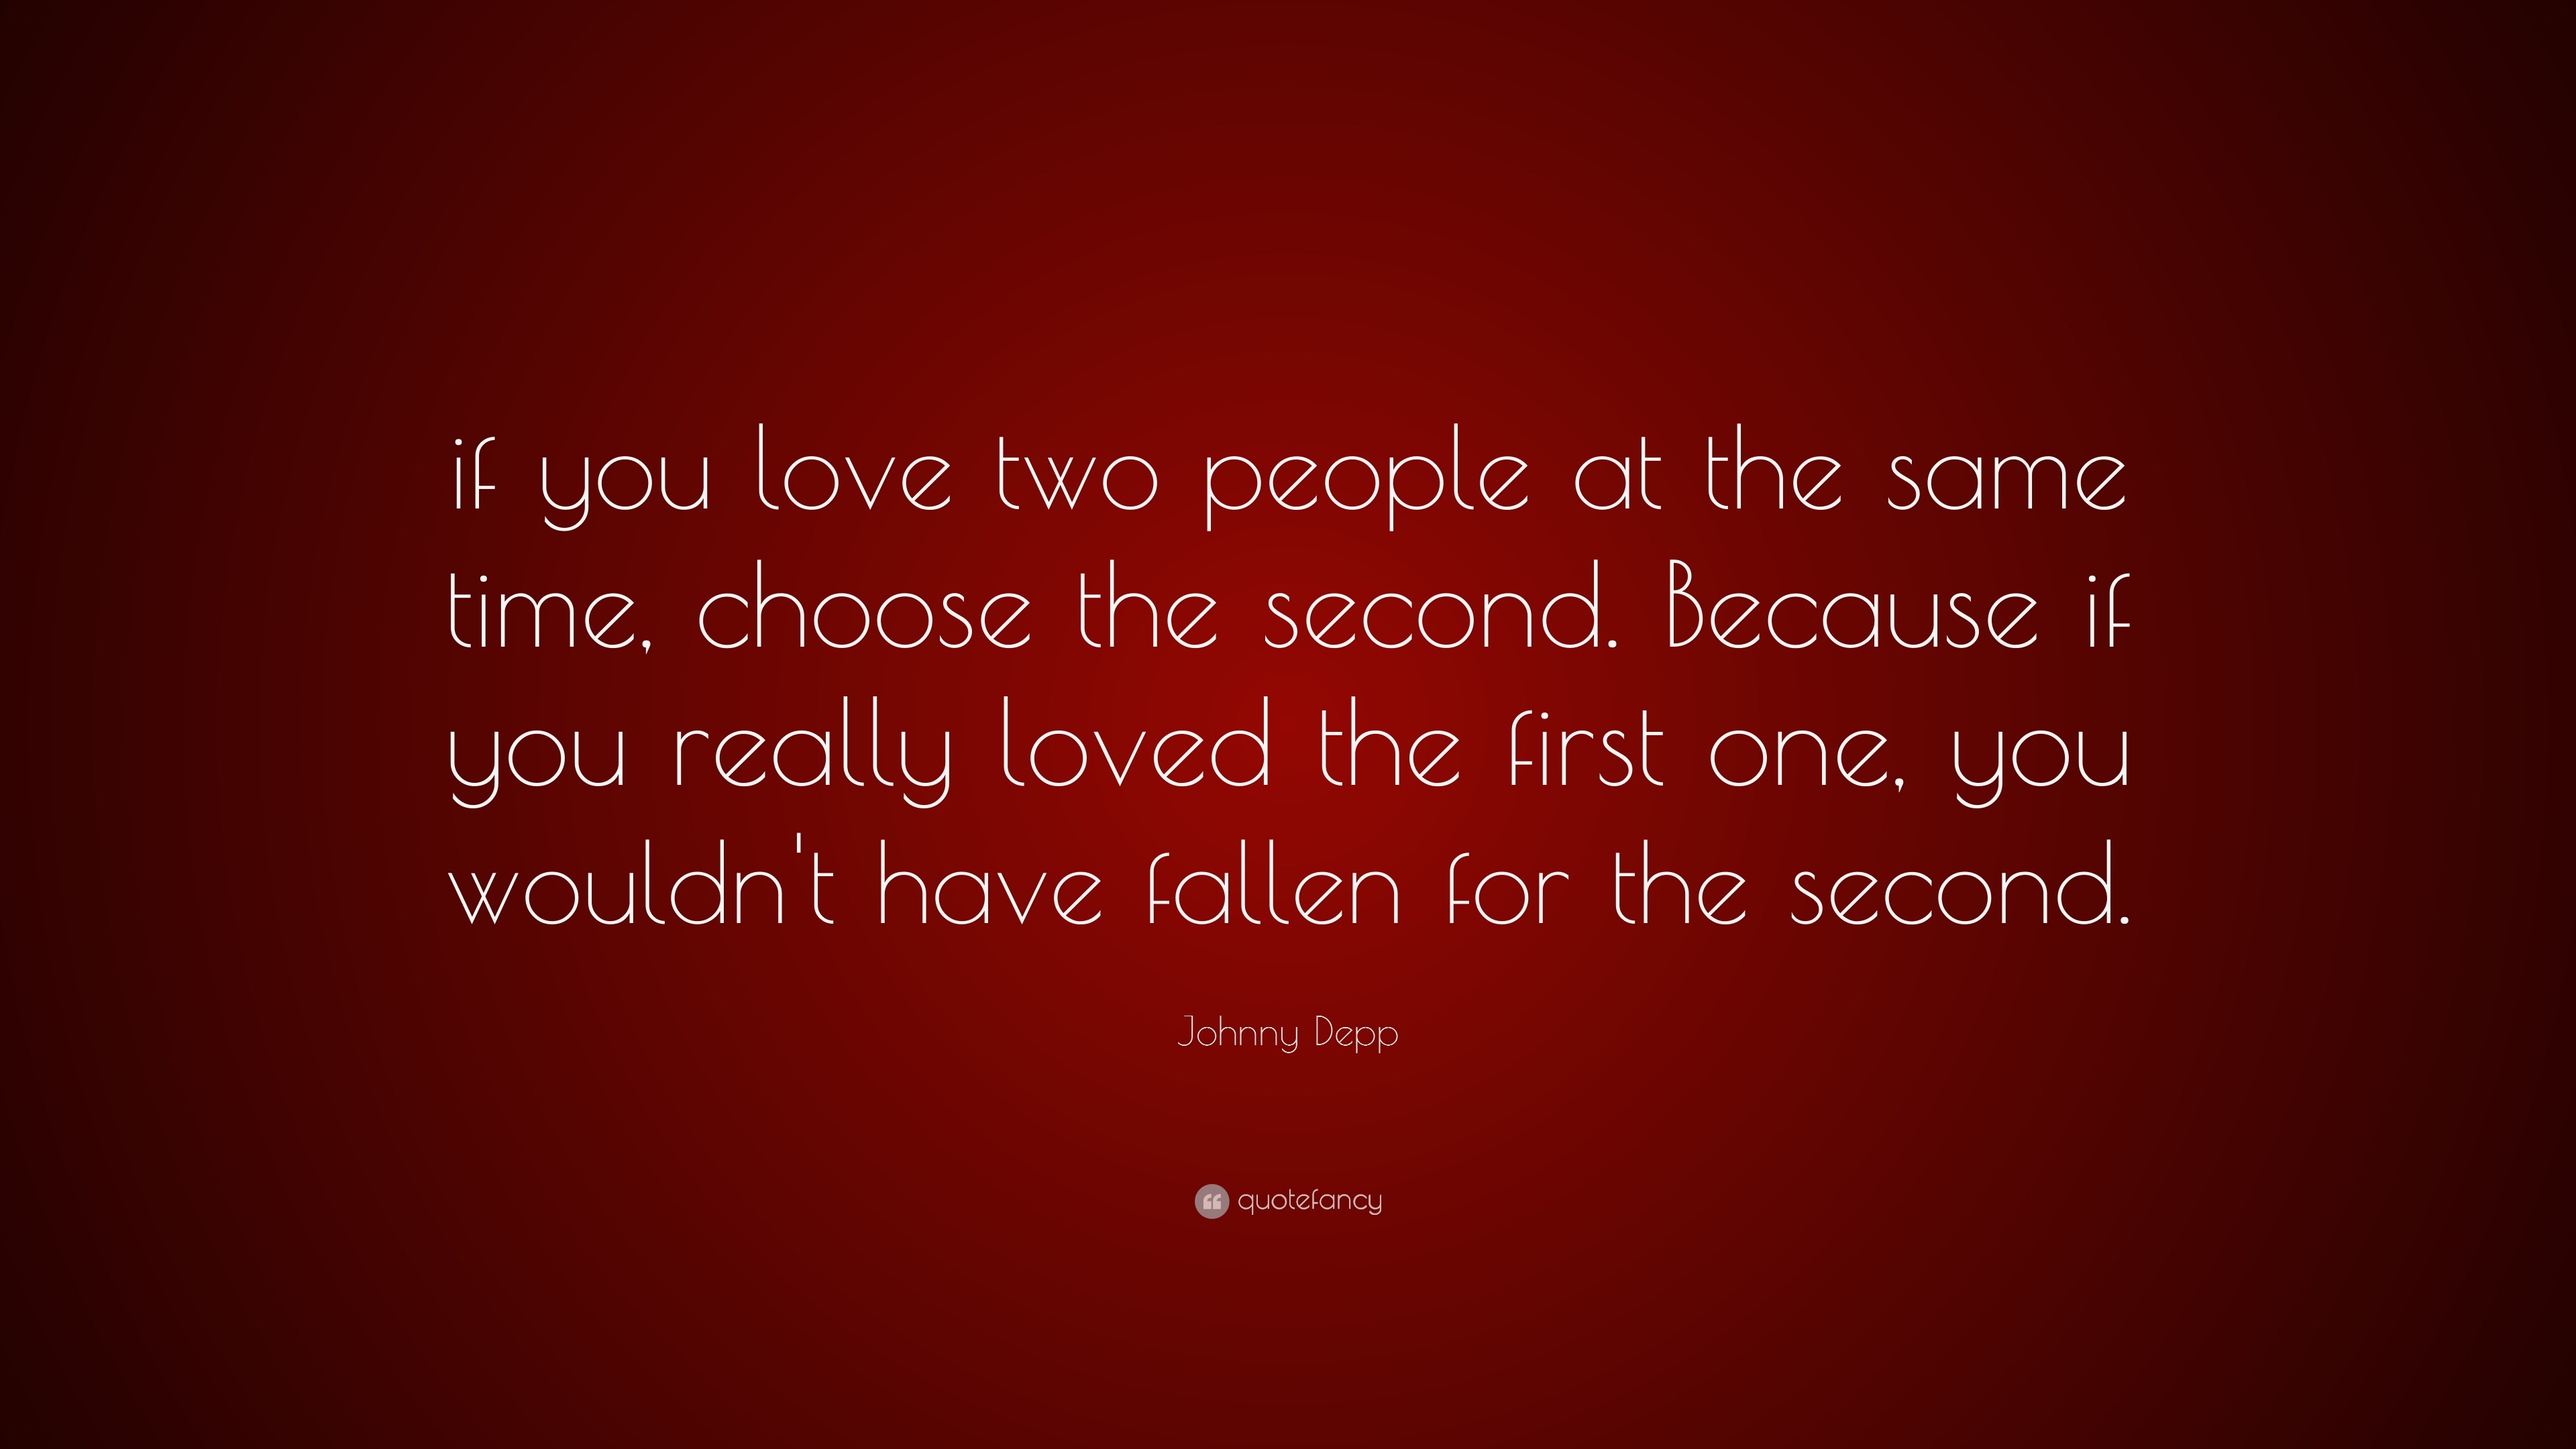 Johnny Depp Quote “If you love two people at the same time choose